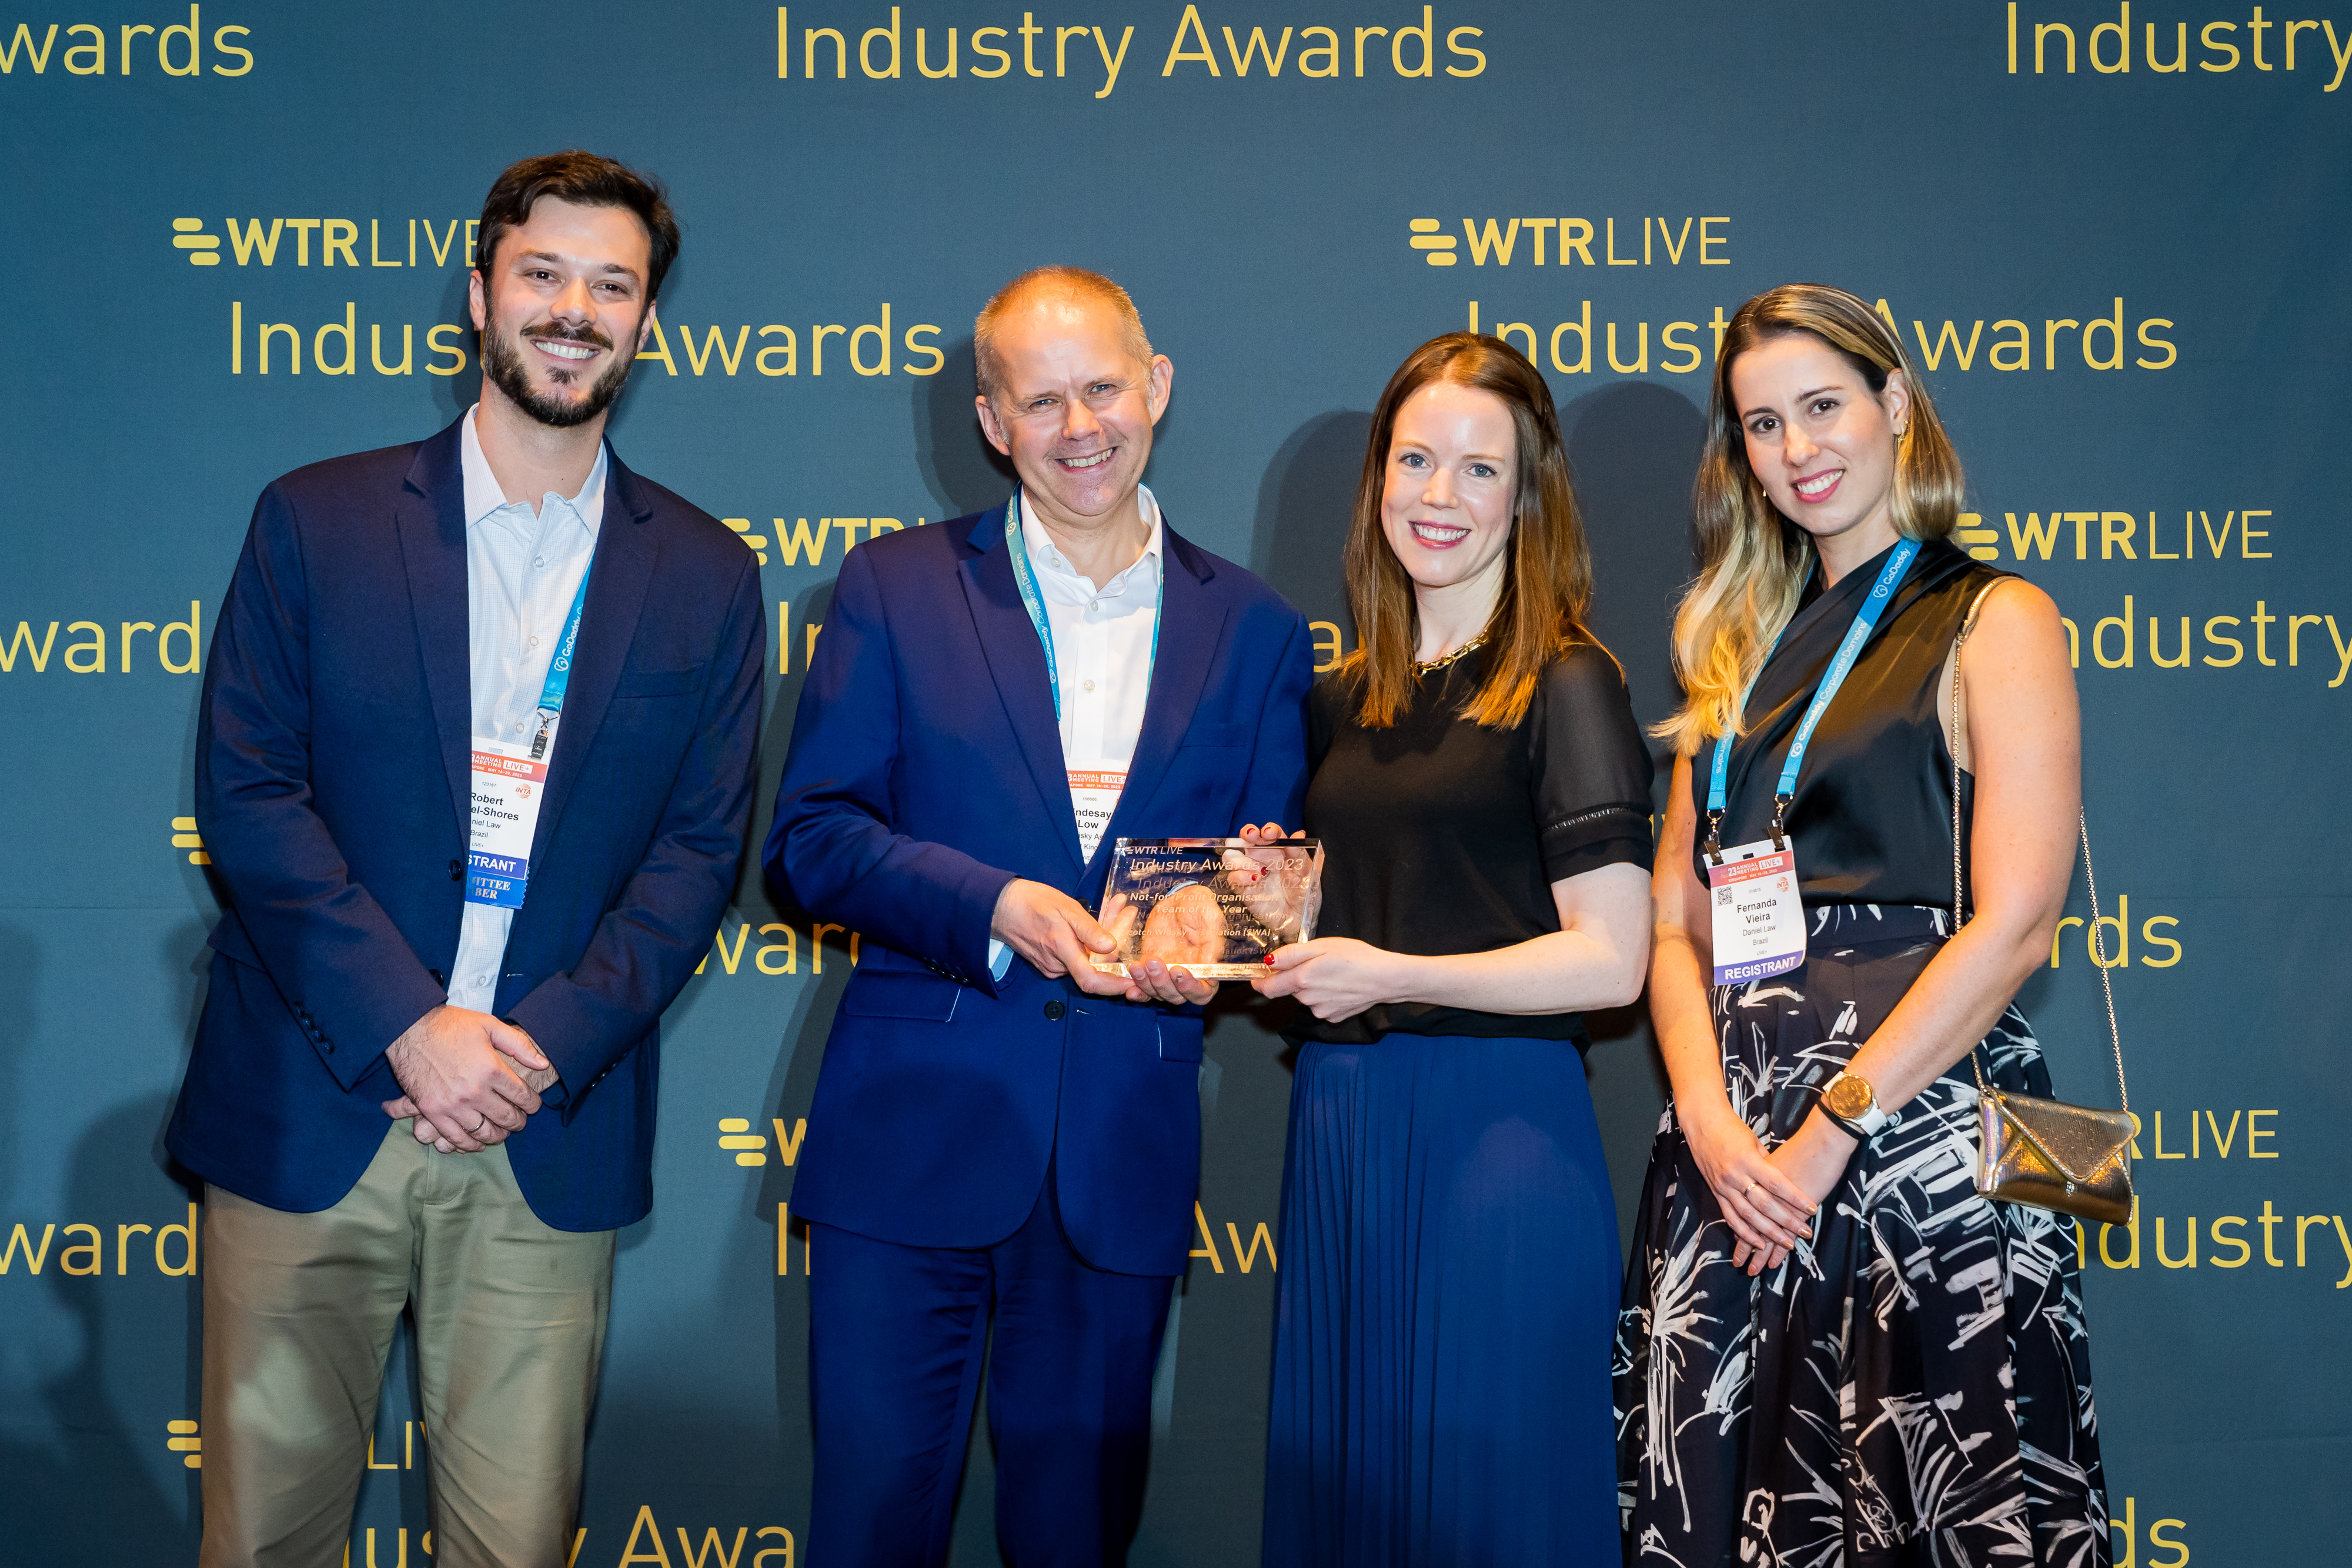 The Scotch Whisky Association's Lindesay Low (Deputy Director of Legal Affairs) and Caitlin O'Donnell (Senior Legal Counsel) - both centre - collected the award at the ceremony in Singapore.